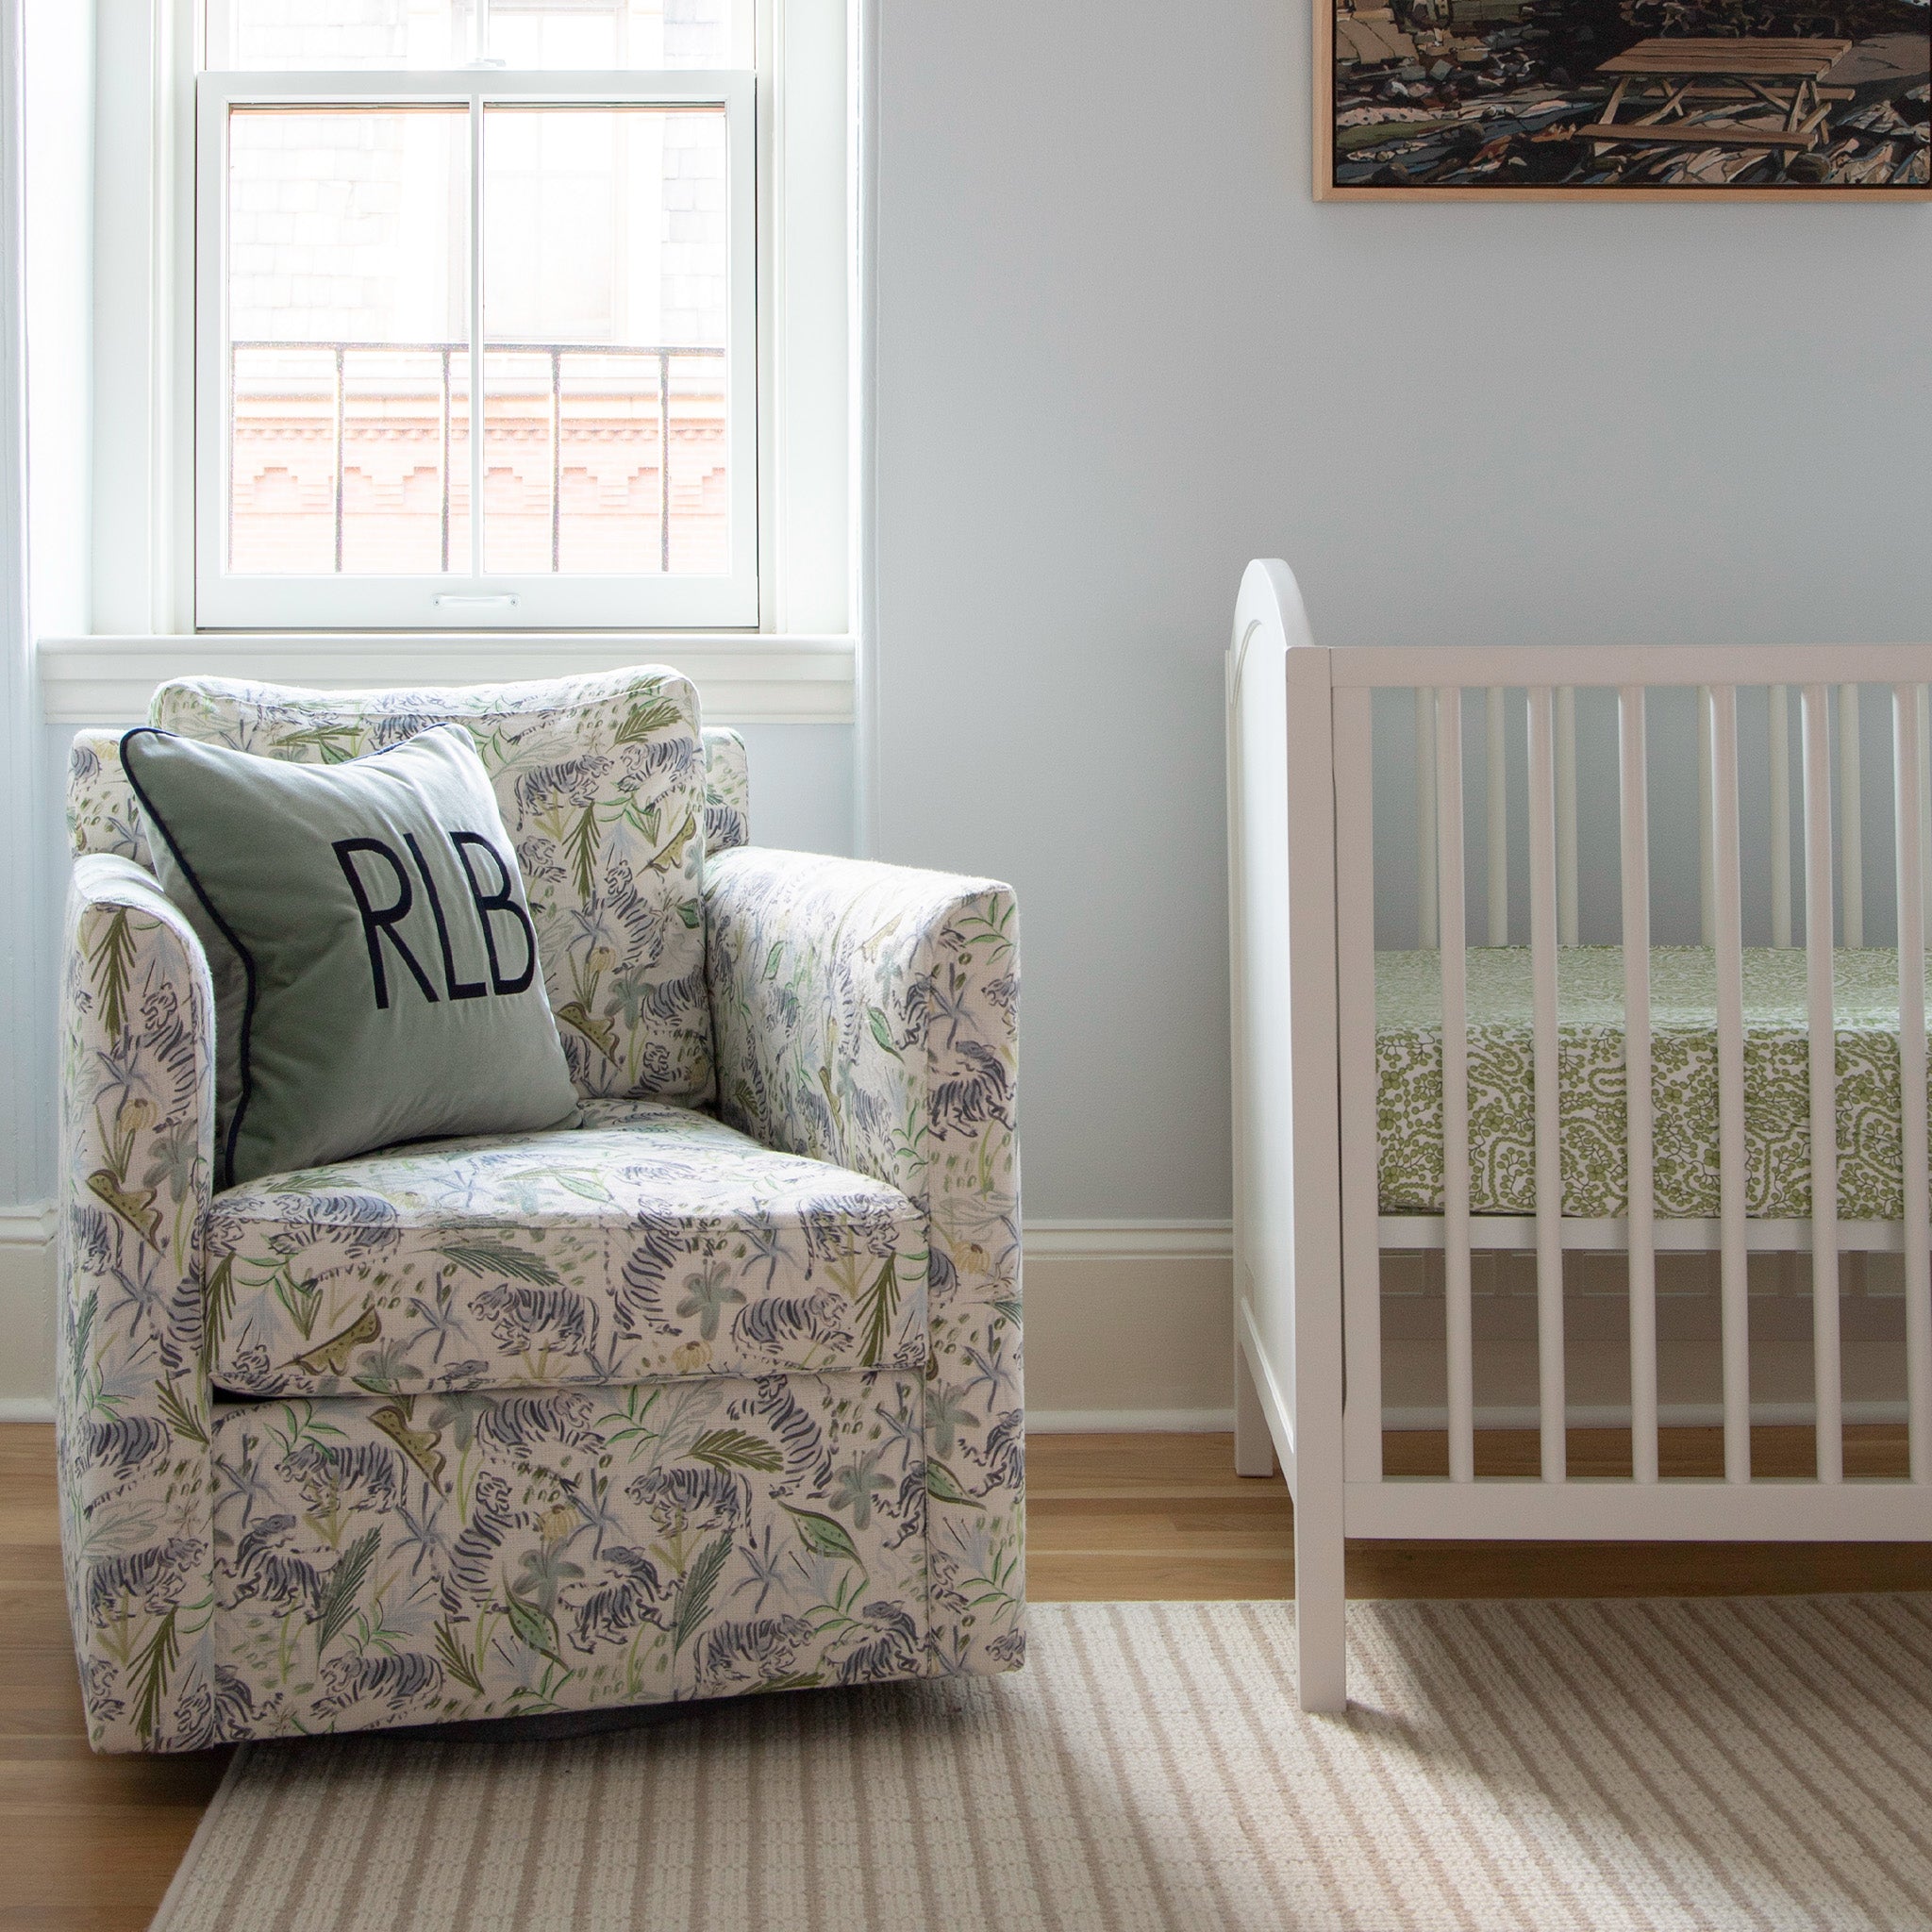 Nursery room with Green Tiger Printed Sofa Chair styled with a Blue Green Velvet Pillow next to white crib and illuminated window